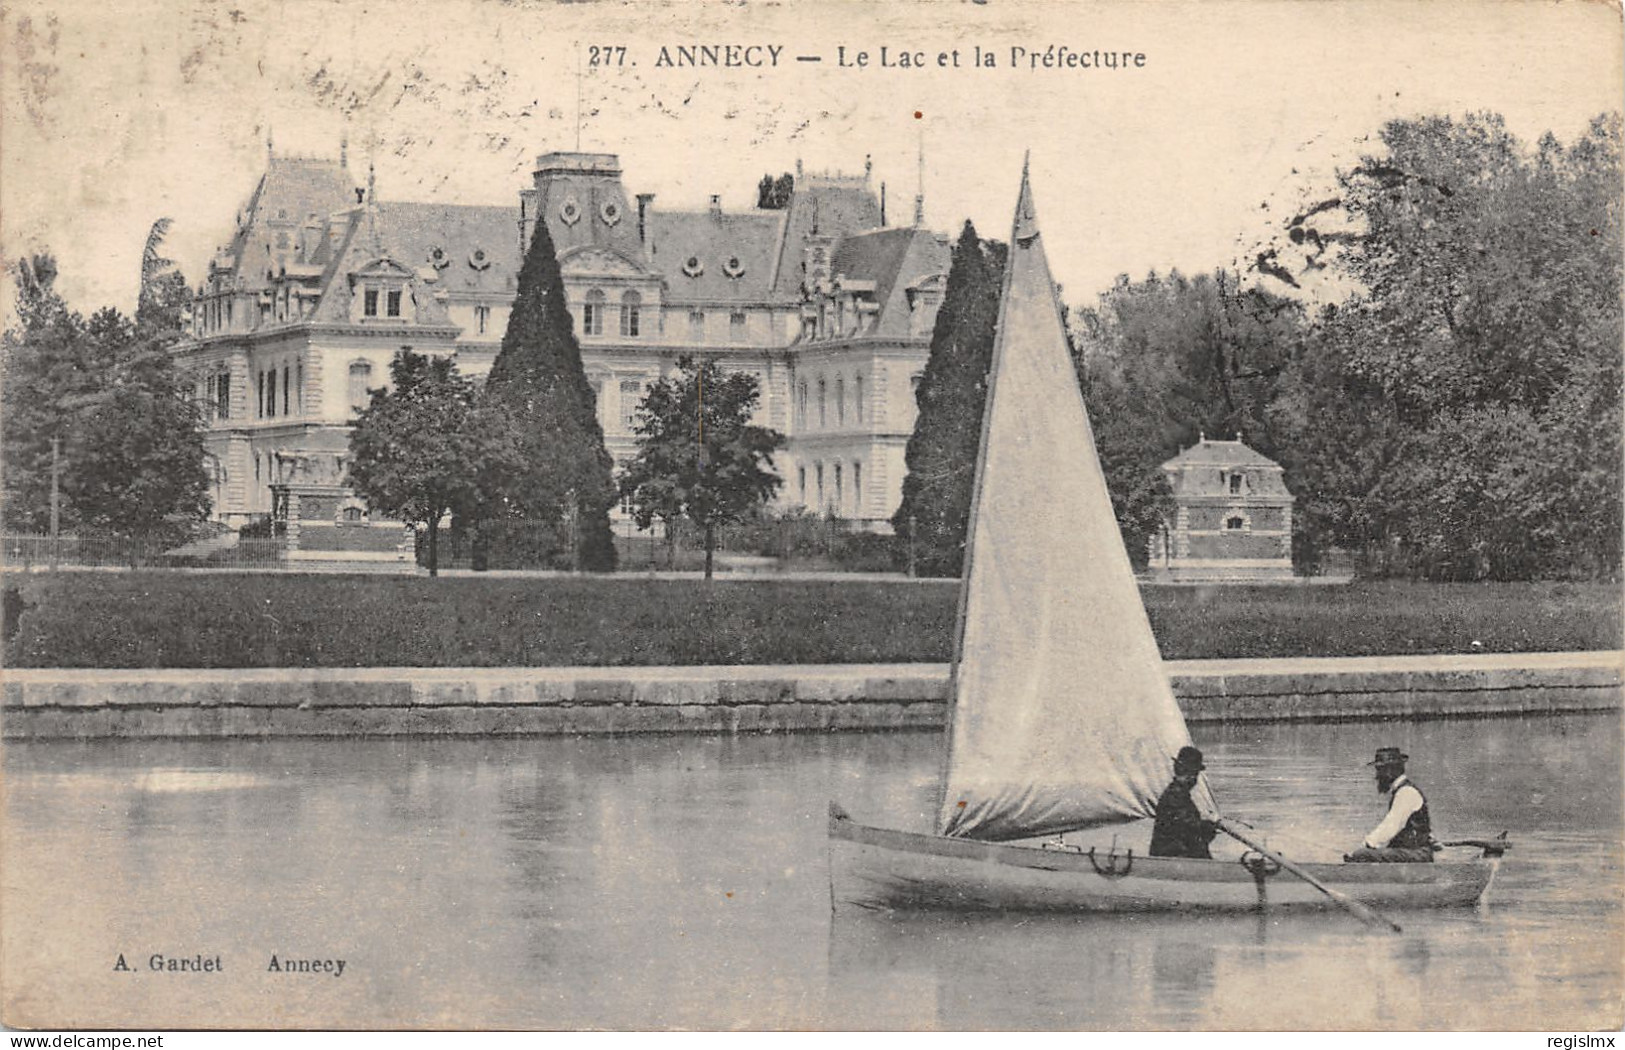 74-ANNECY-N°355-D/0251 - Annecy